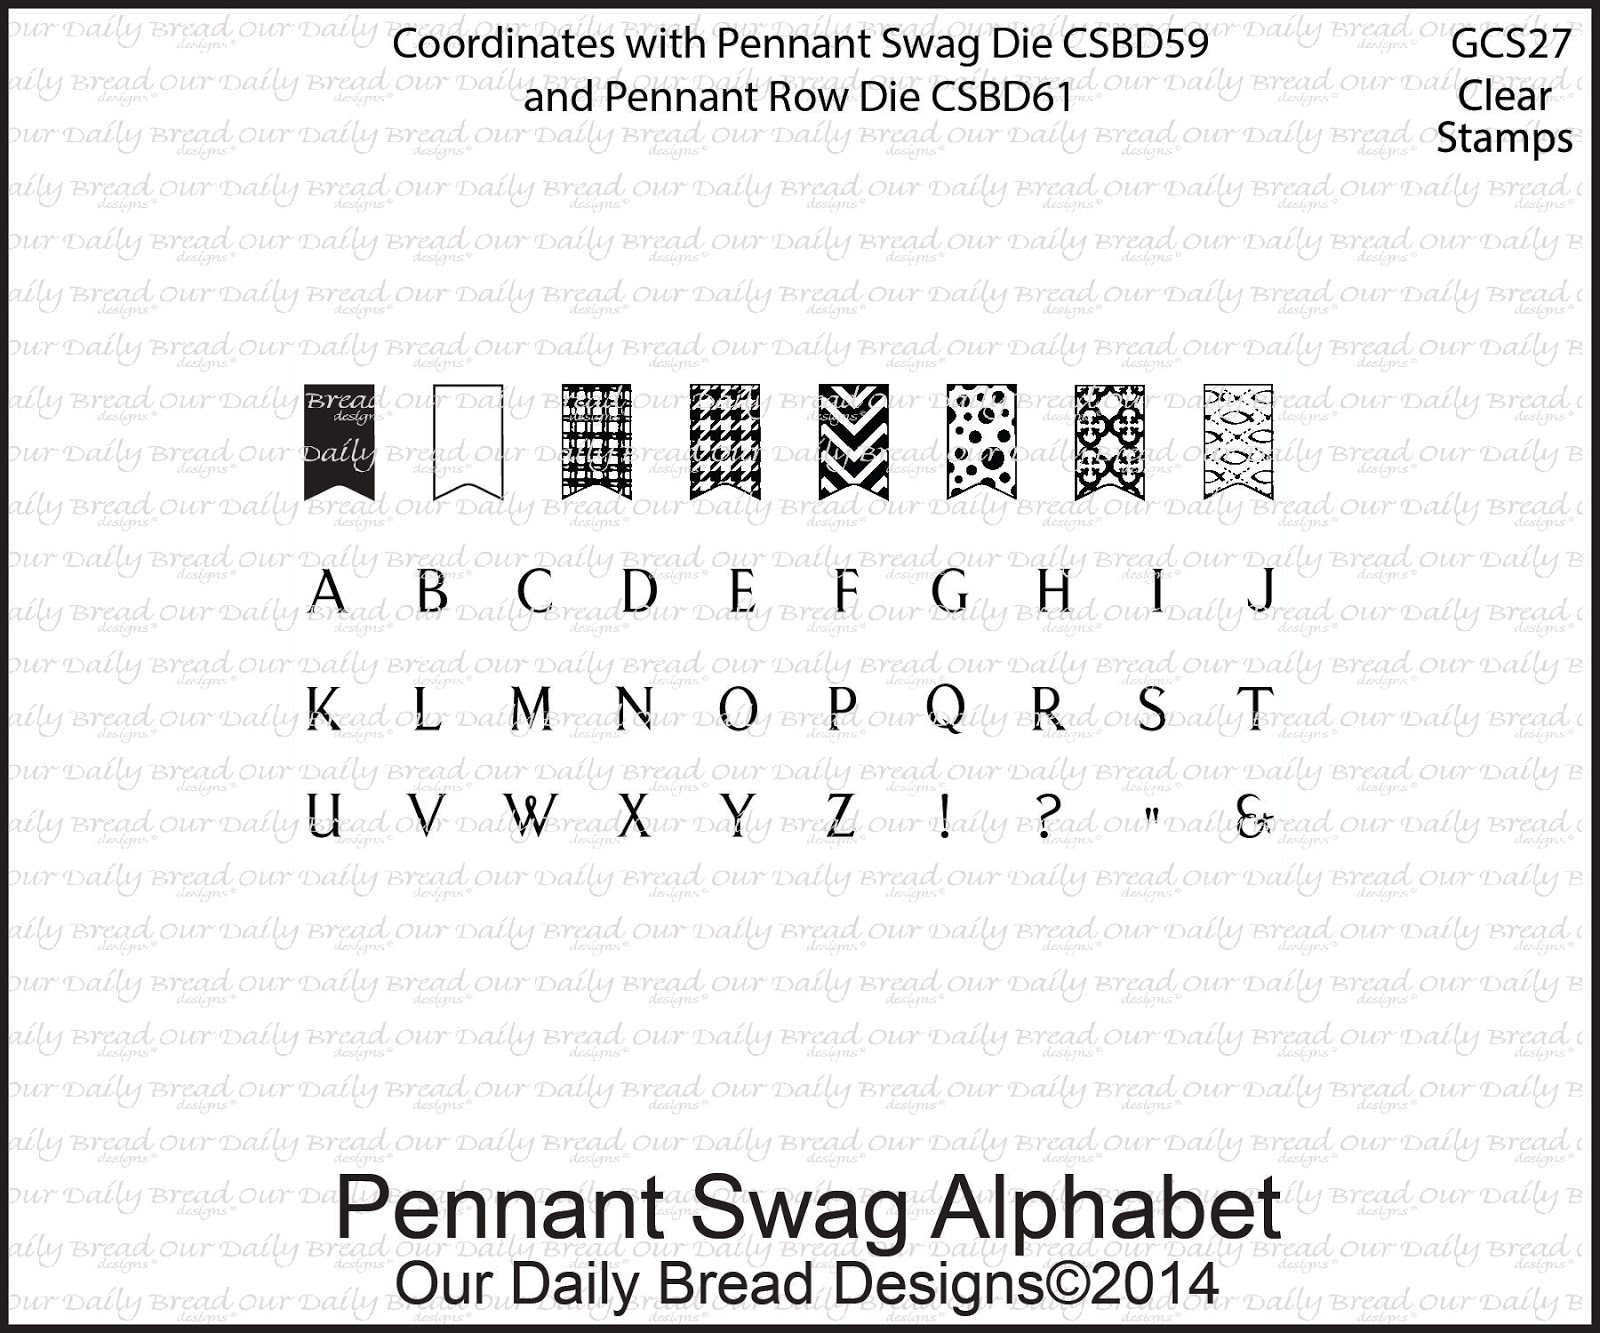 http://www.ourdailybreaddesigns.com/index.php/gcs27-pennant-swag-alphabet-clear-stamps.html